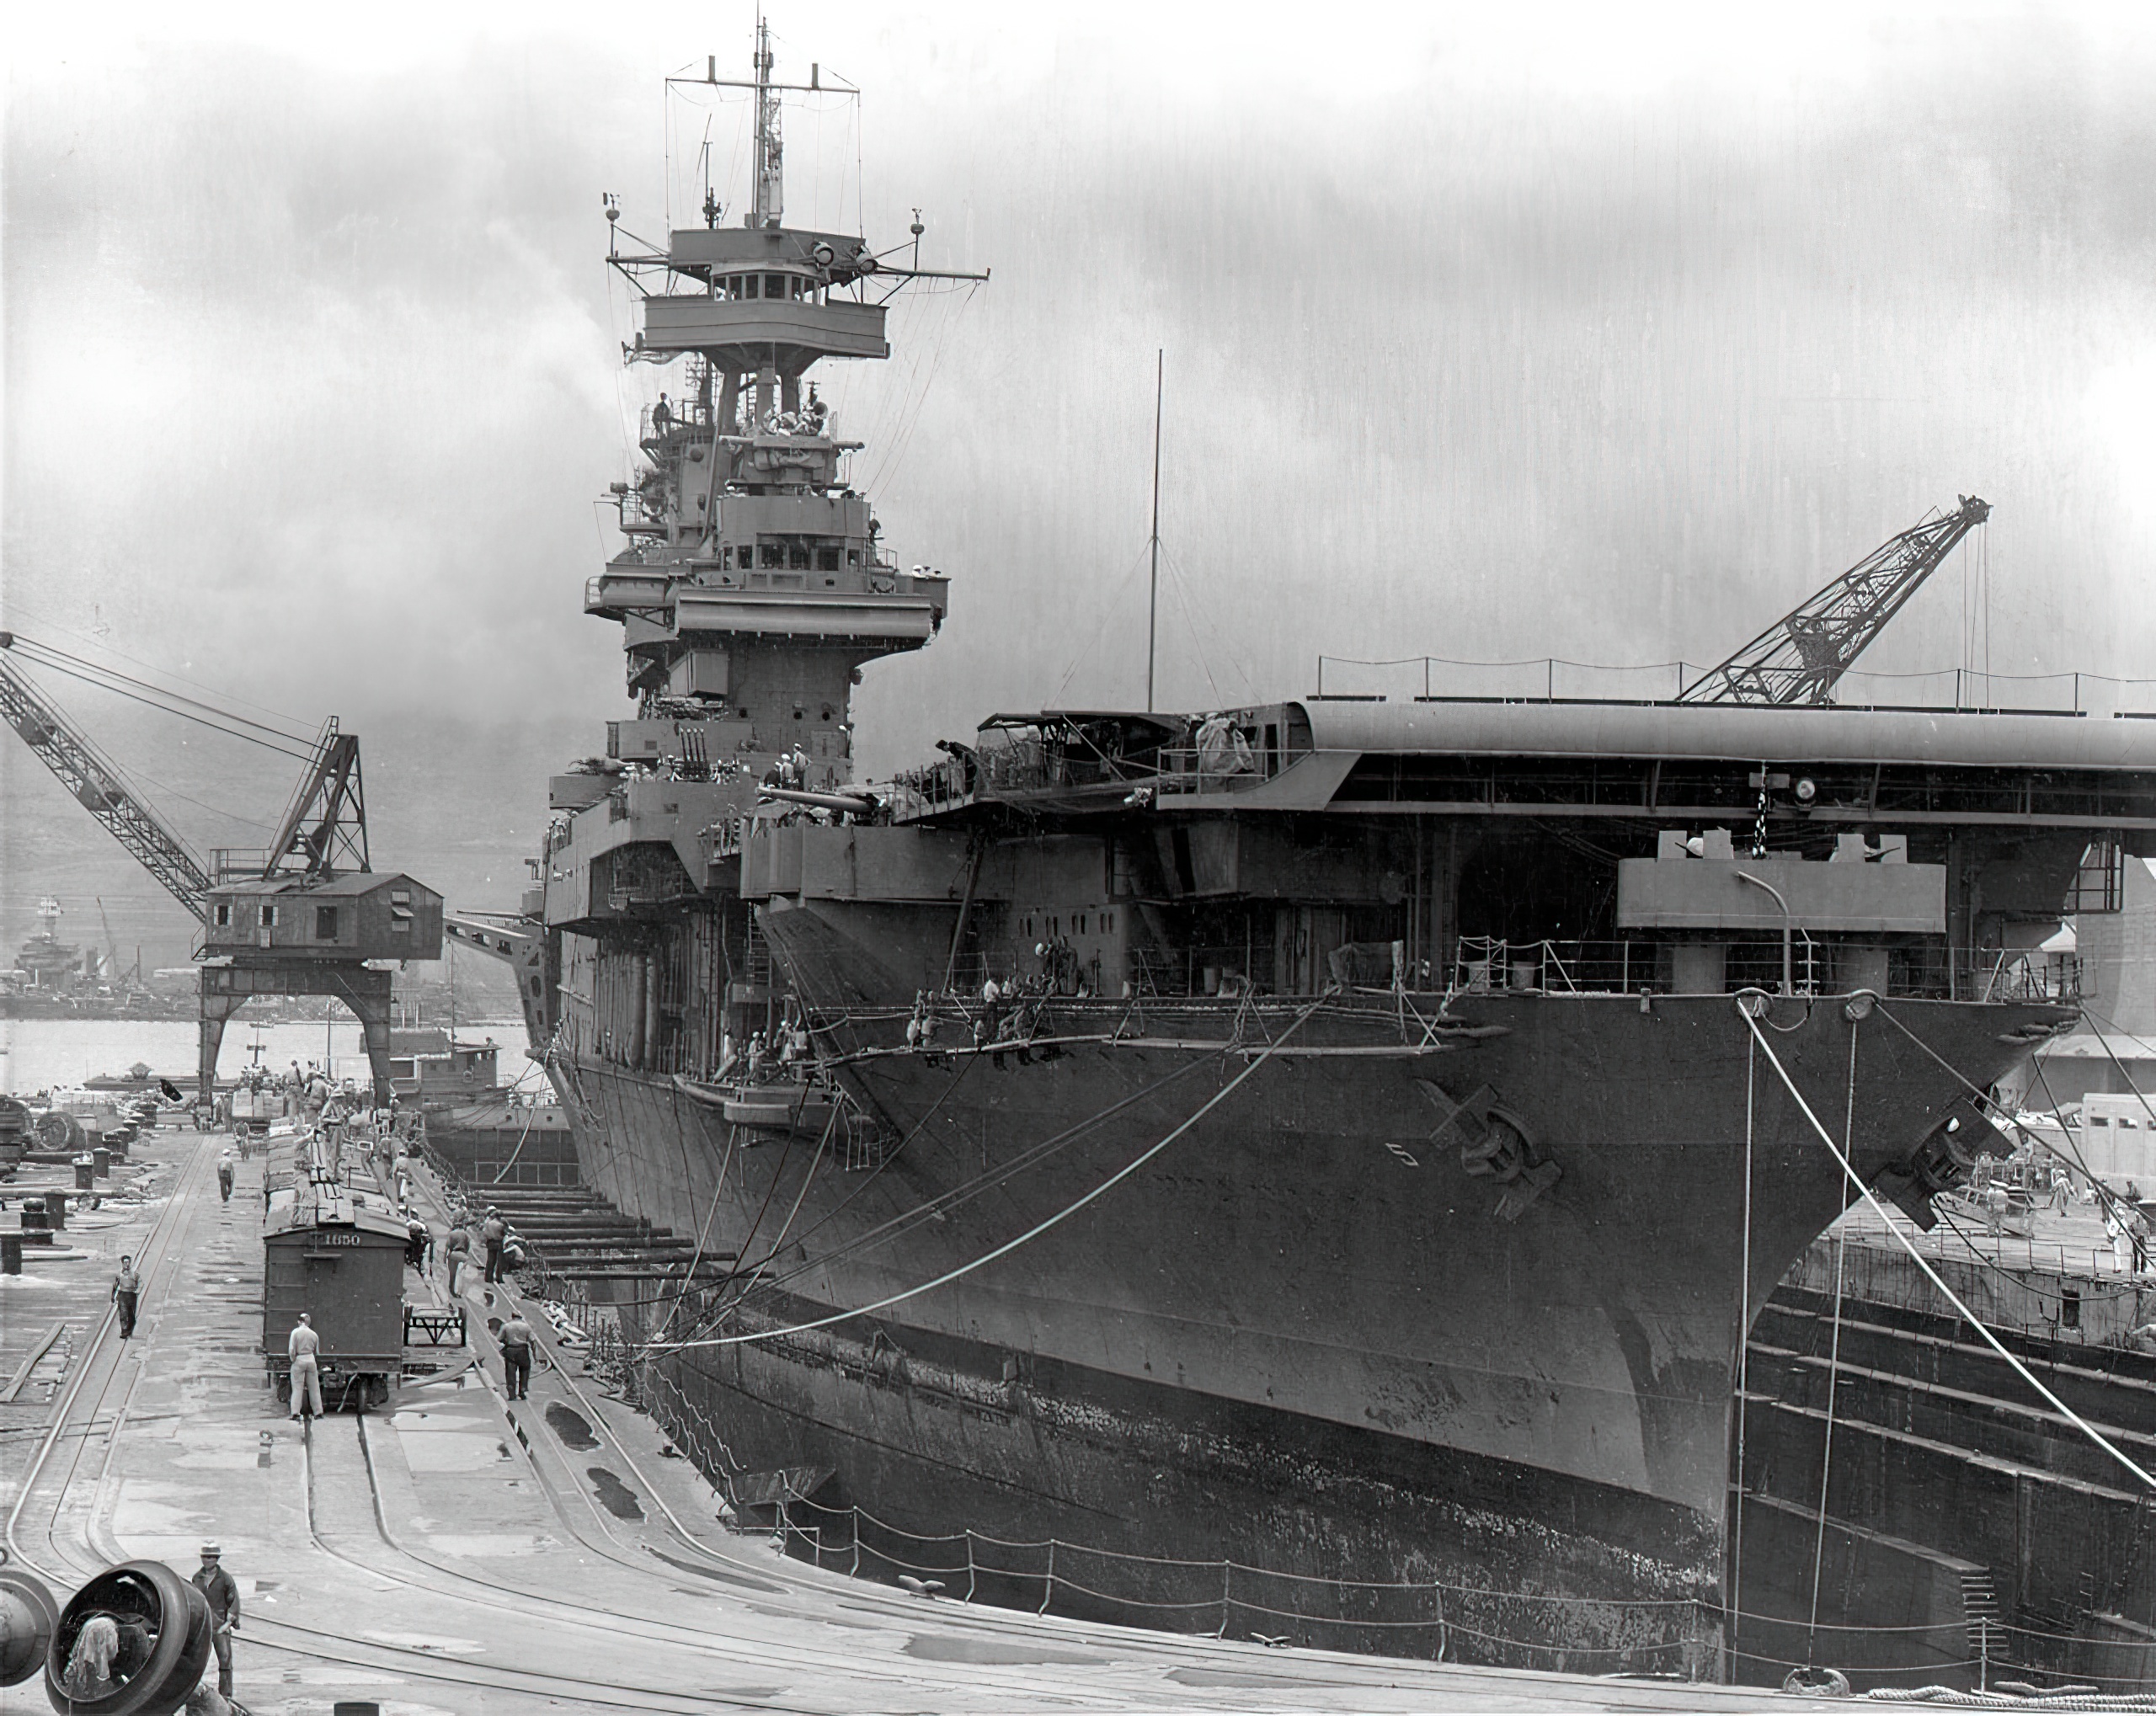 The U.S. Navy aircraft carrier USS Yorktown (CV-5) in Dry Dock No. 1 at the Pearl Harbor Naval Shipyard, 29 May 1942, receiving urgent repairs for damage received in the Battle of Coral Sea. She left Pearl Harbor the next day to participate in the Battle of Midway